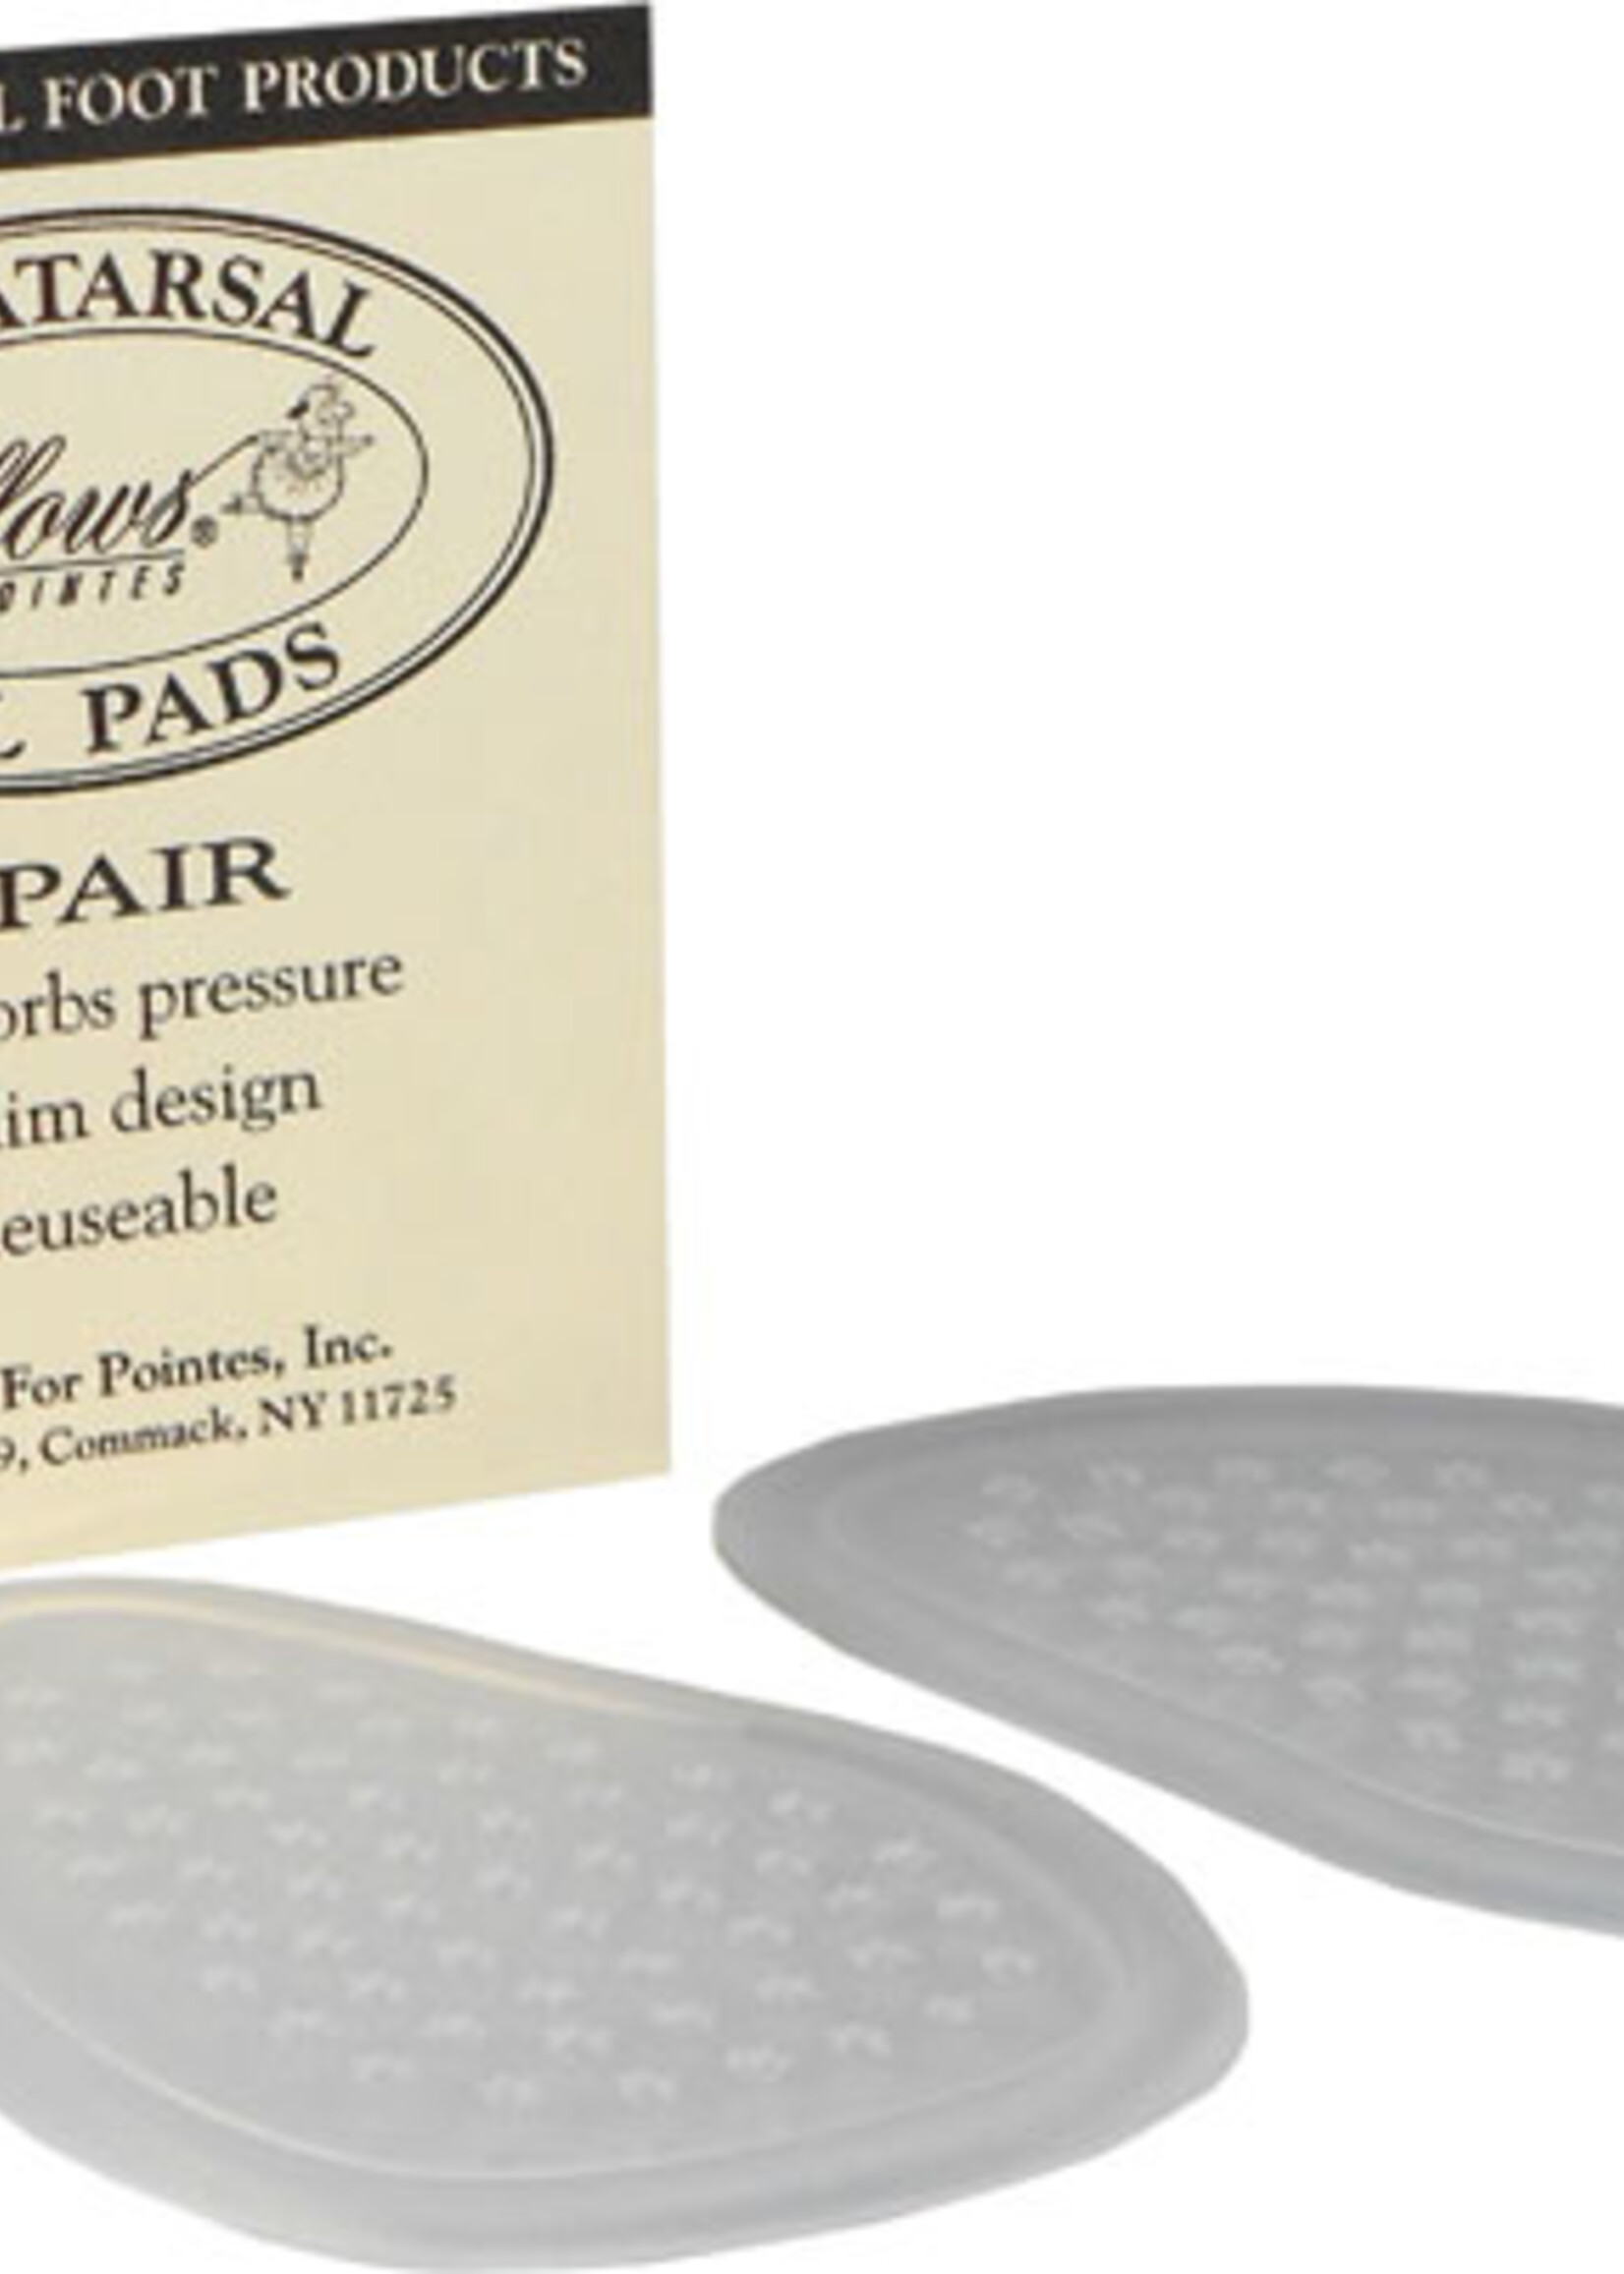 PILLOWS FOR POINTES METATARSAL GEL PADS